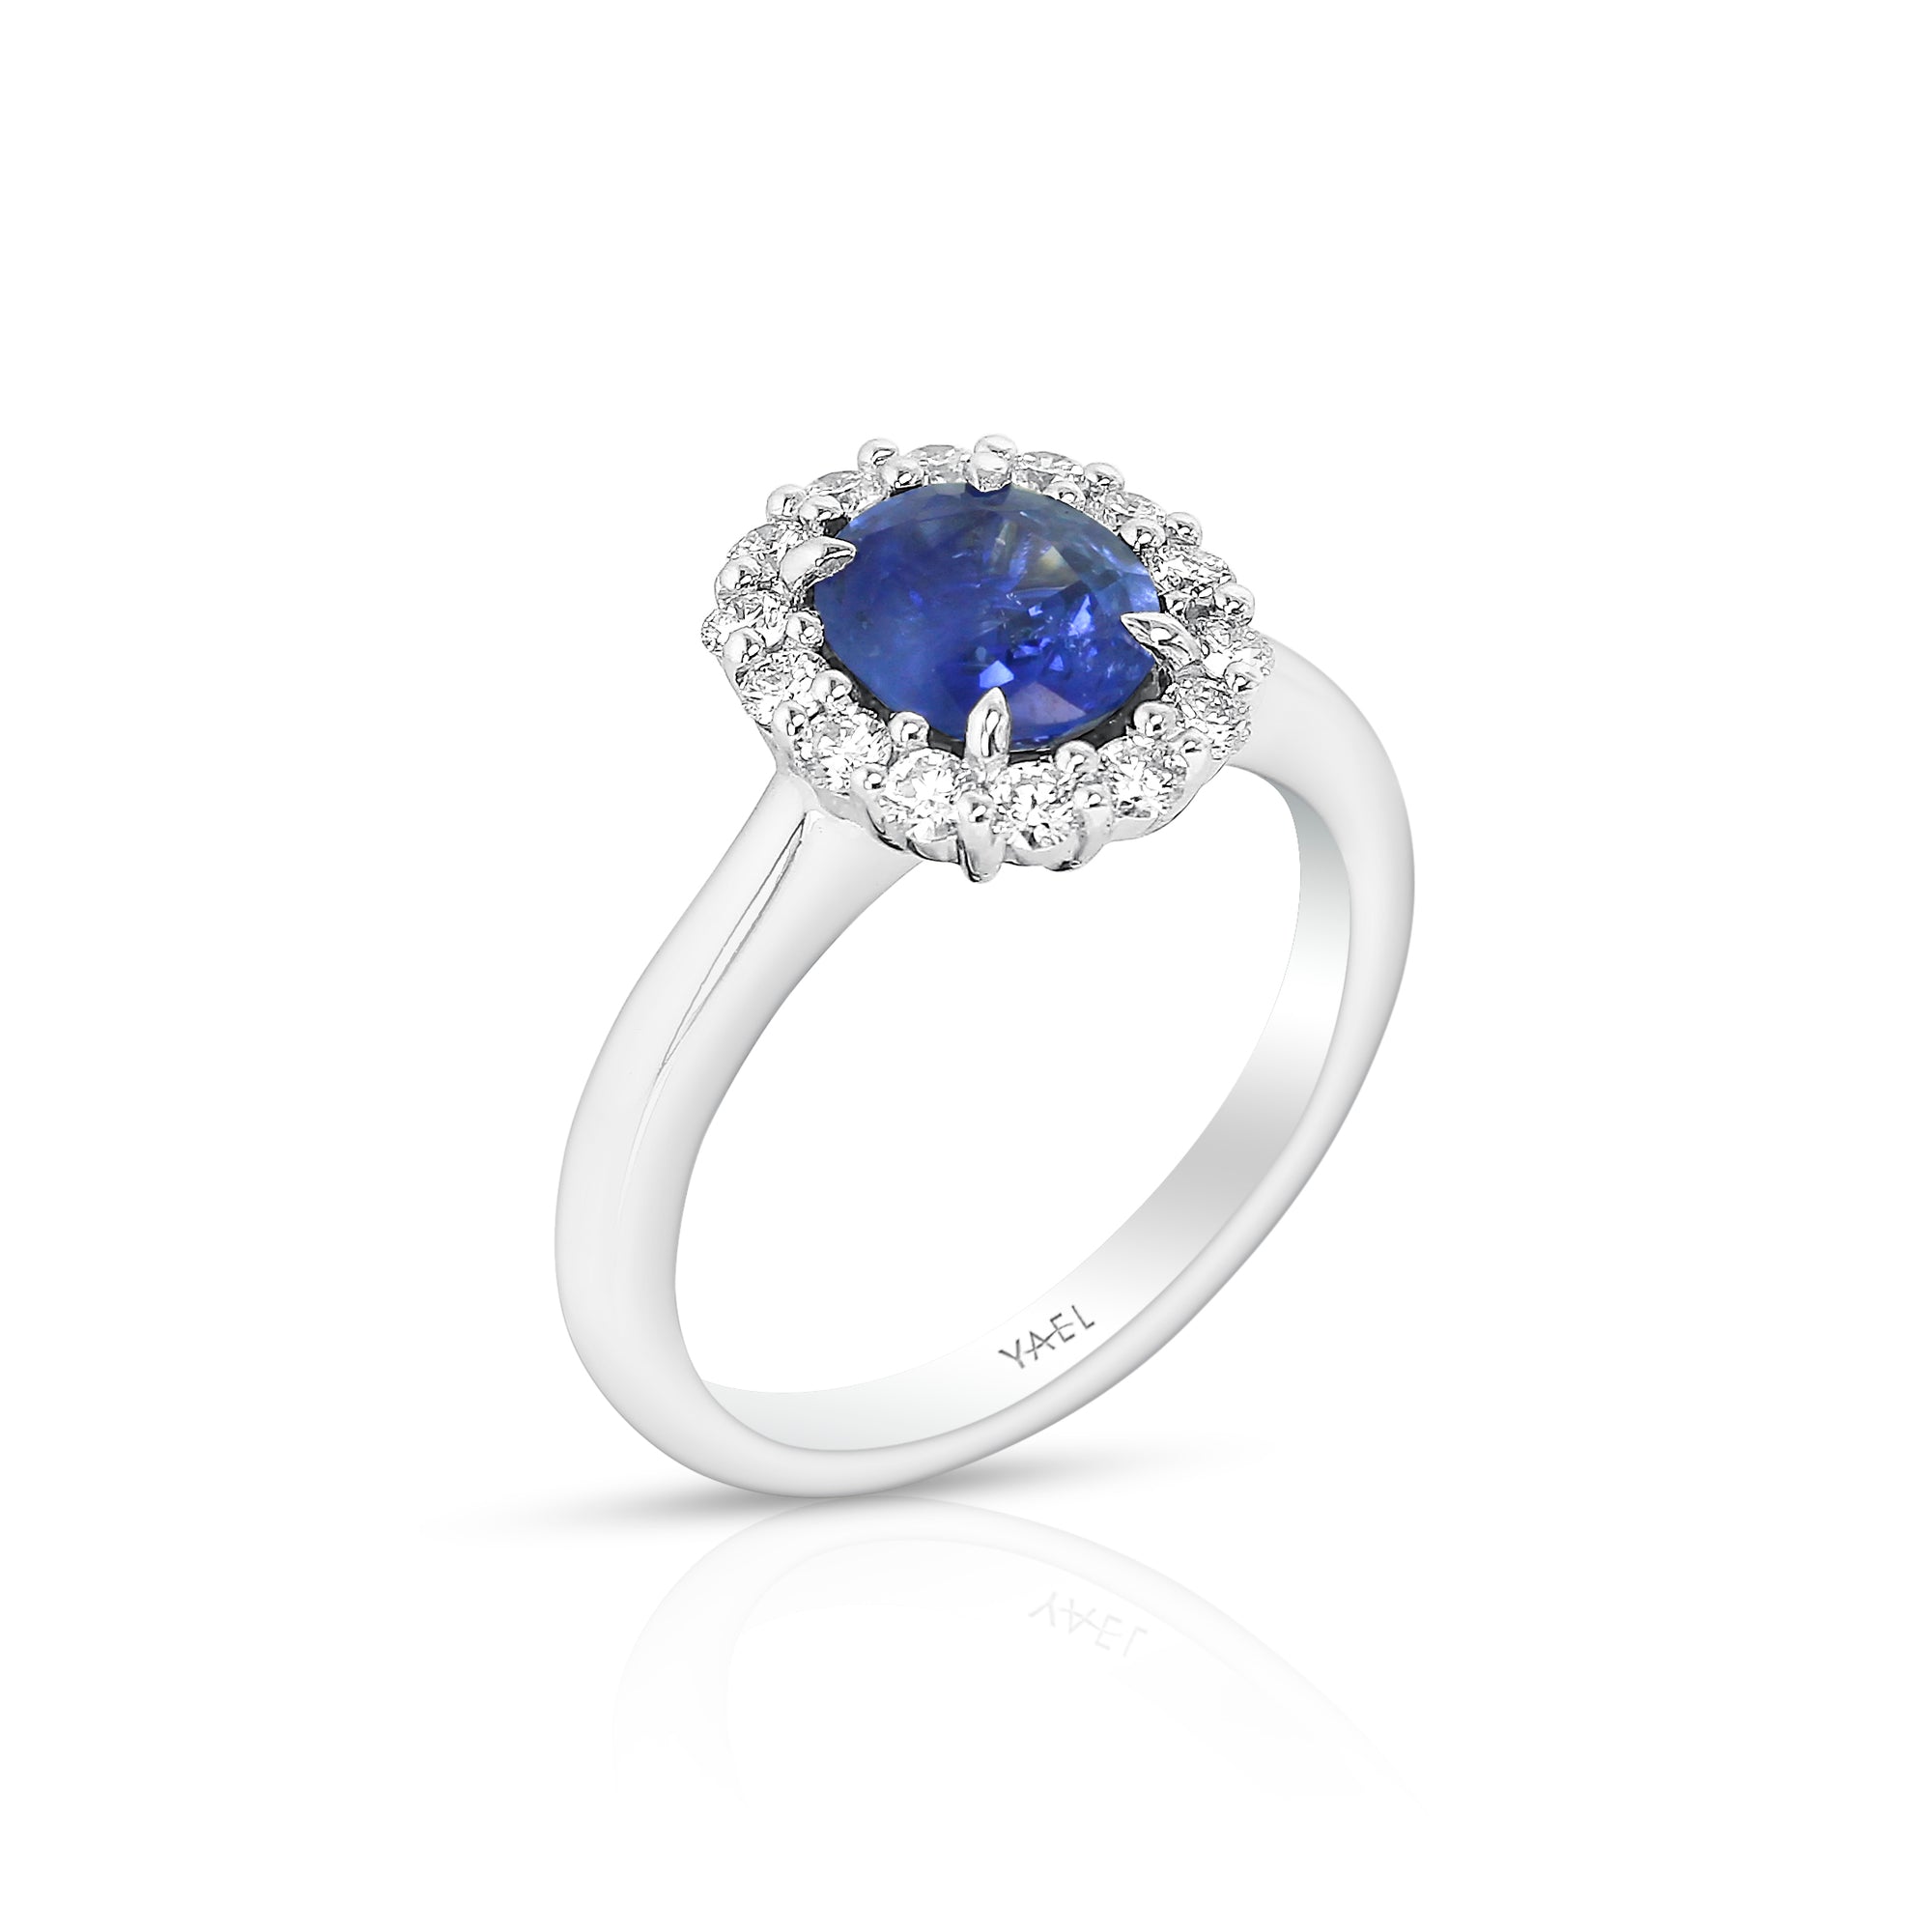 Oval Blue Sapphire and Diamond Ring by Yael - Talisman Collection Fine Jewelers